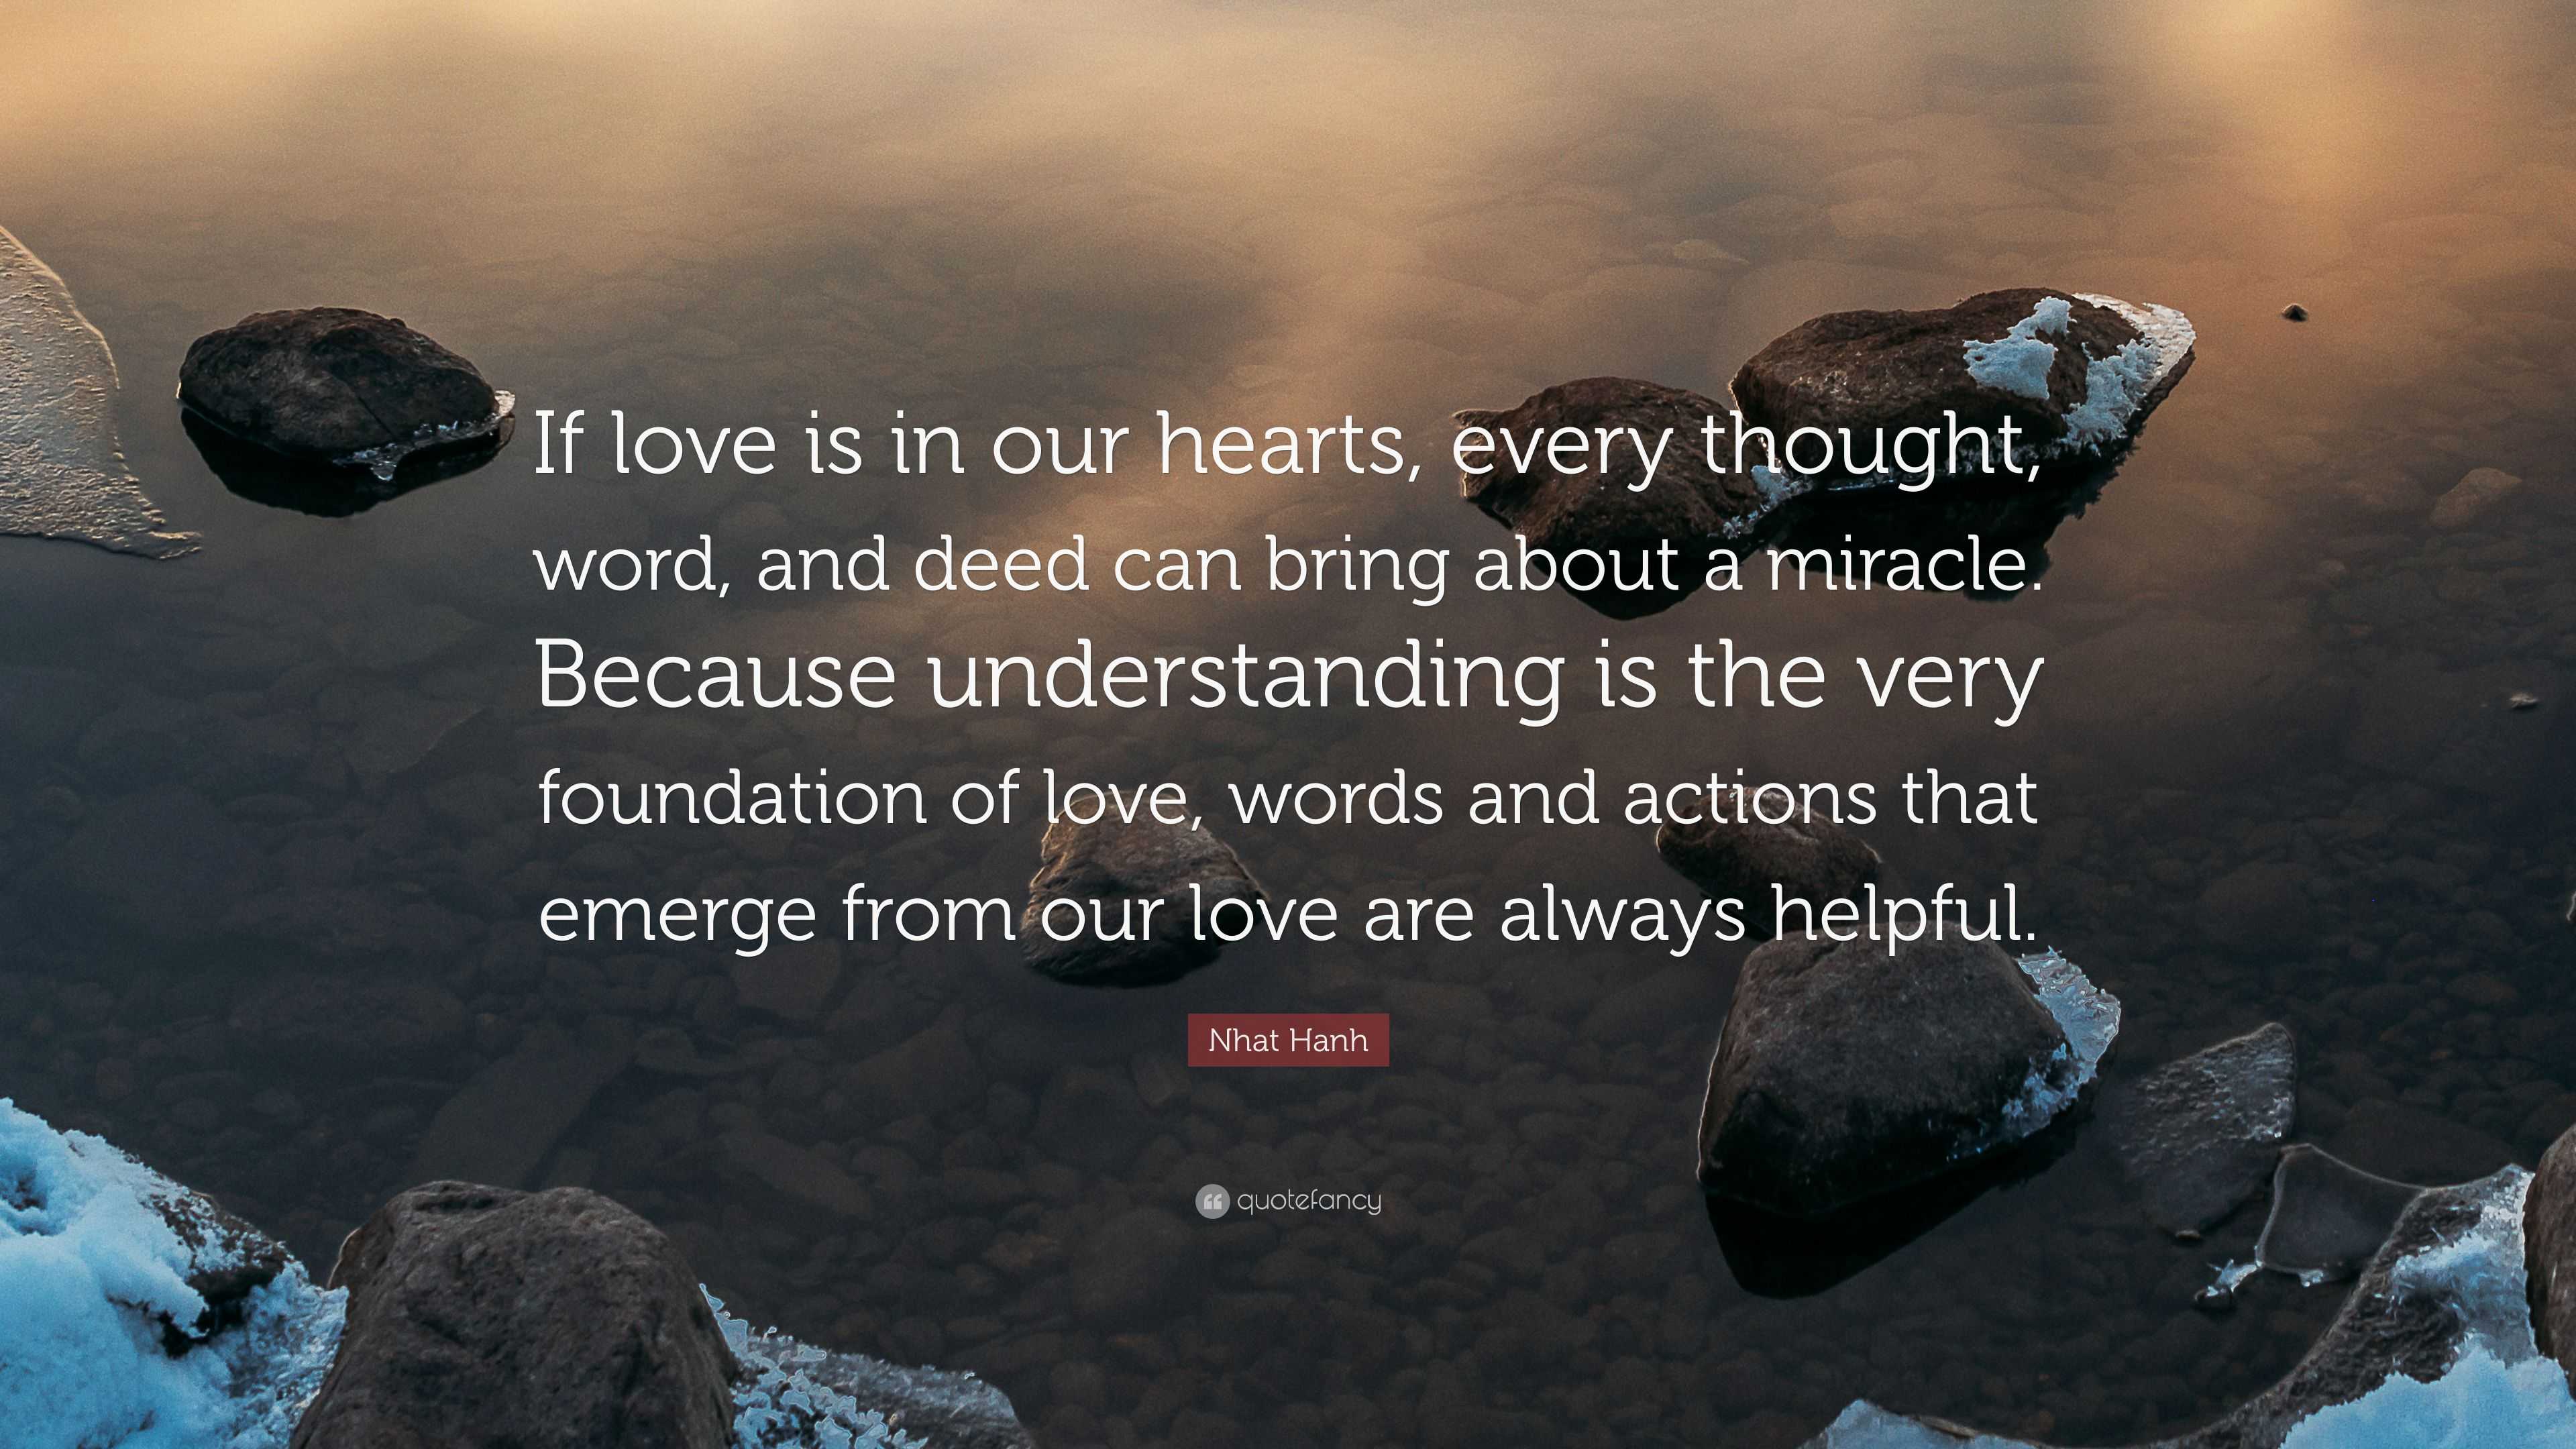 Nhat Hanh Quote: “If love is in our hearts, every thought, word, and ...